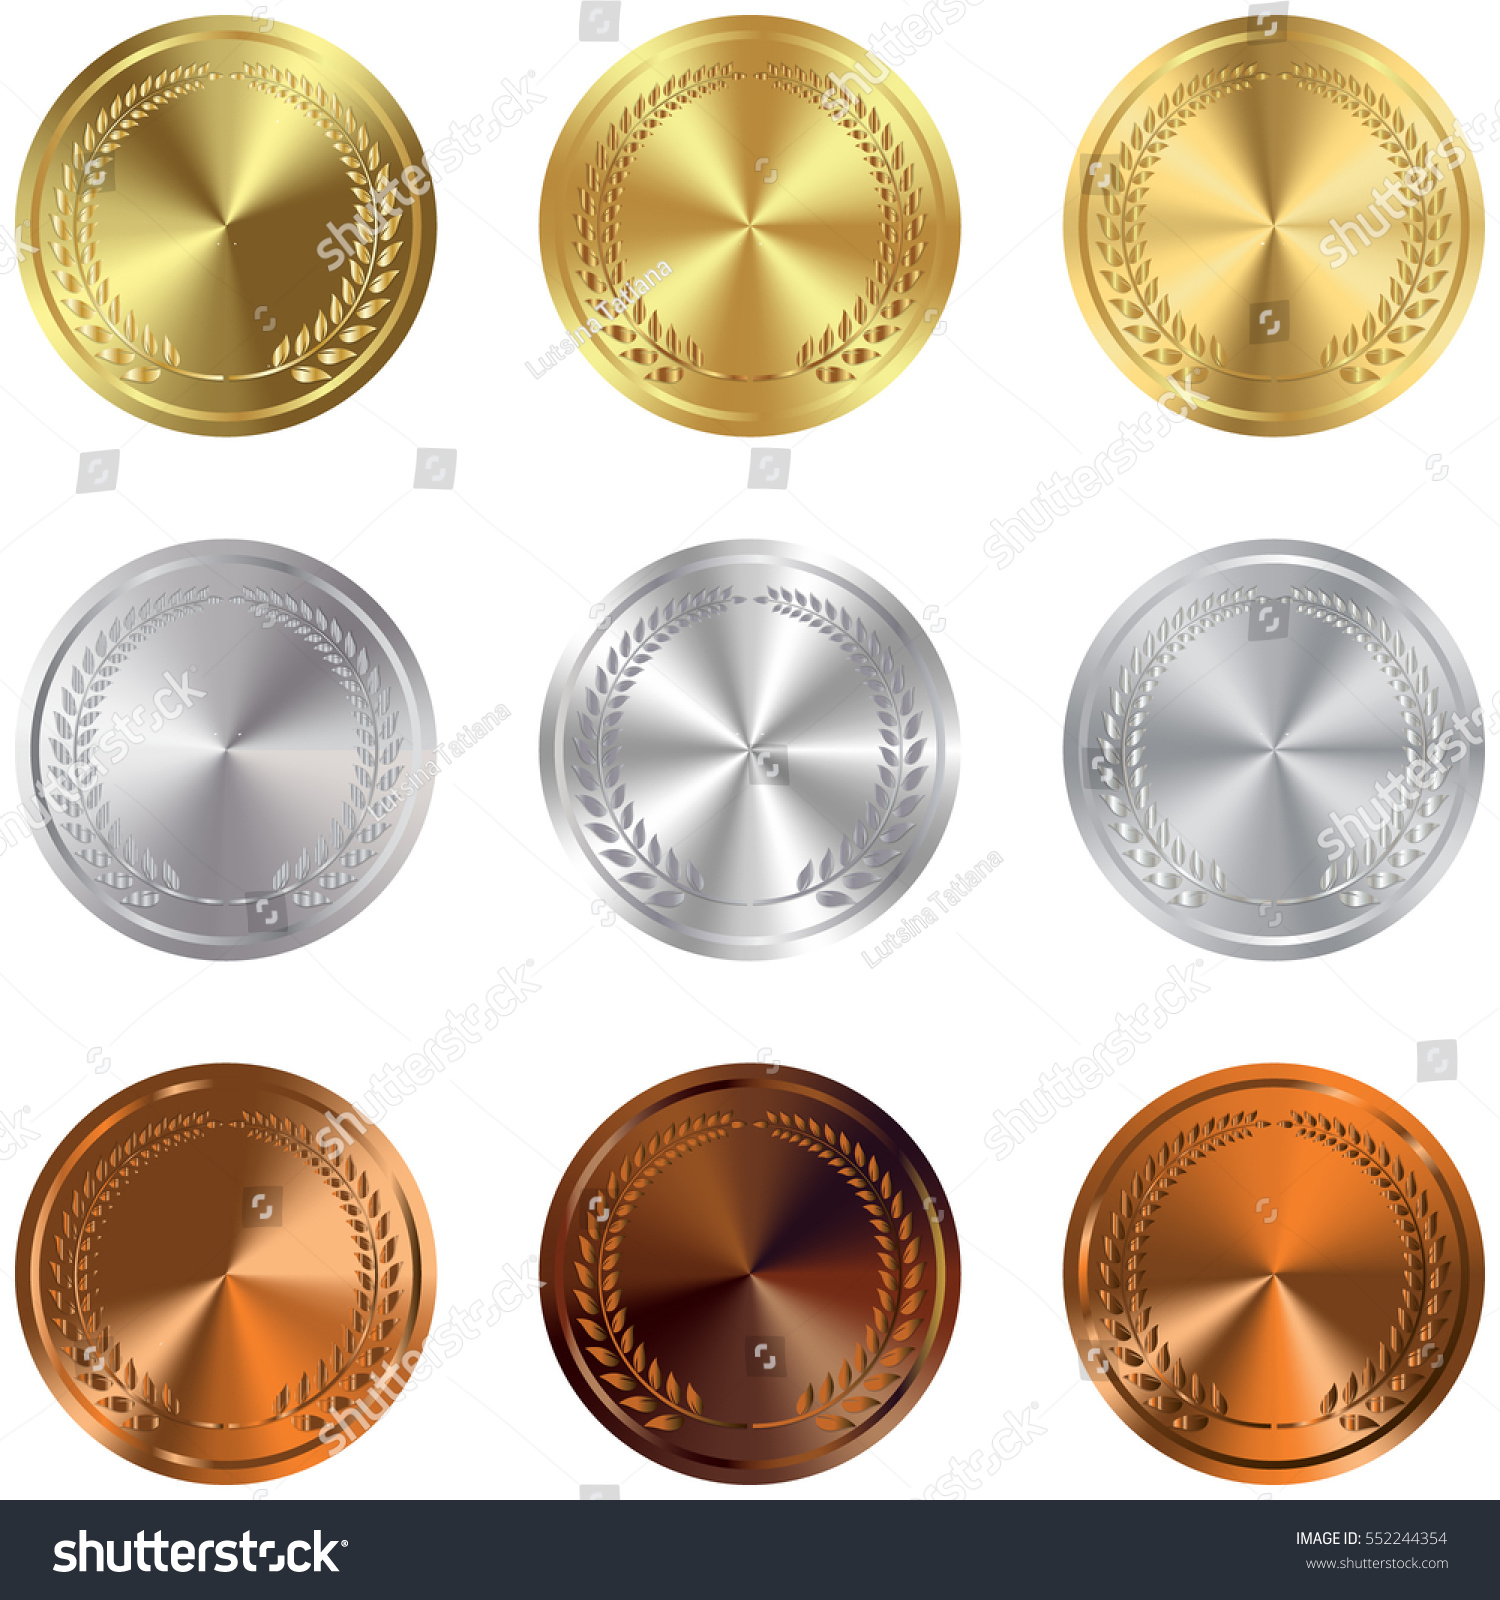 Set of gold, silver and bronze Award medals on white. Vector gold, silver and bronze award medals set isolated on white background. The first, second, third prizes. #552244354